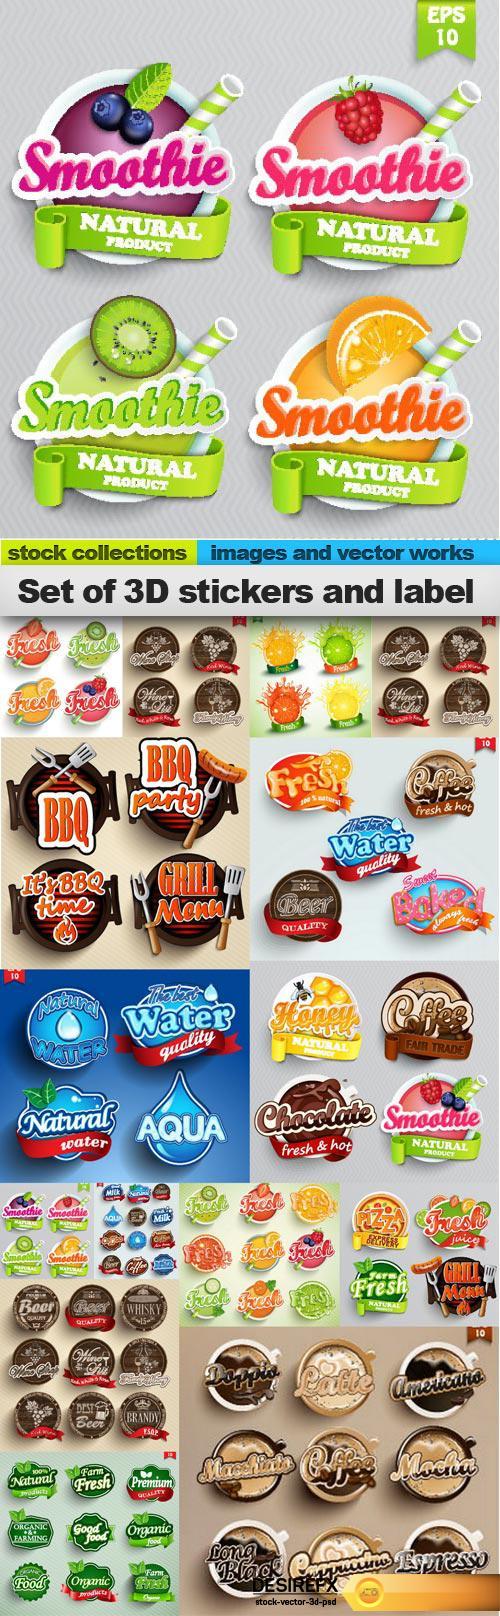 Set of 3D stickers and label, 15 x EPS